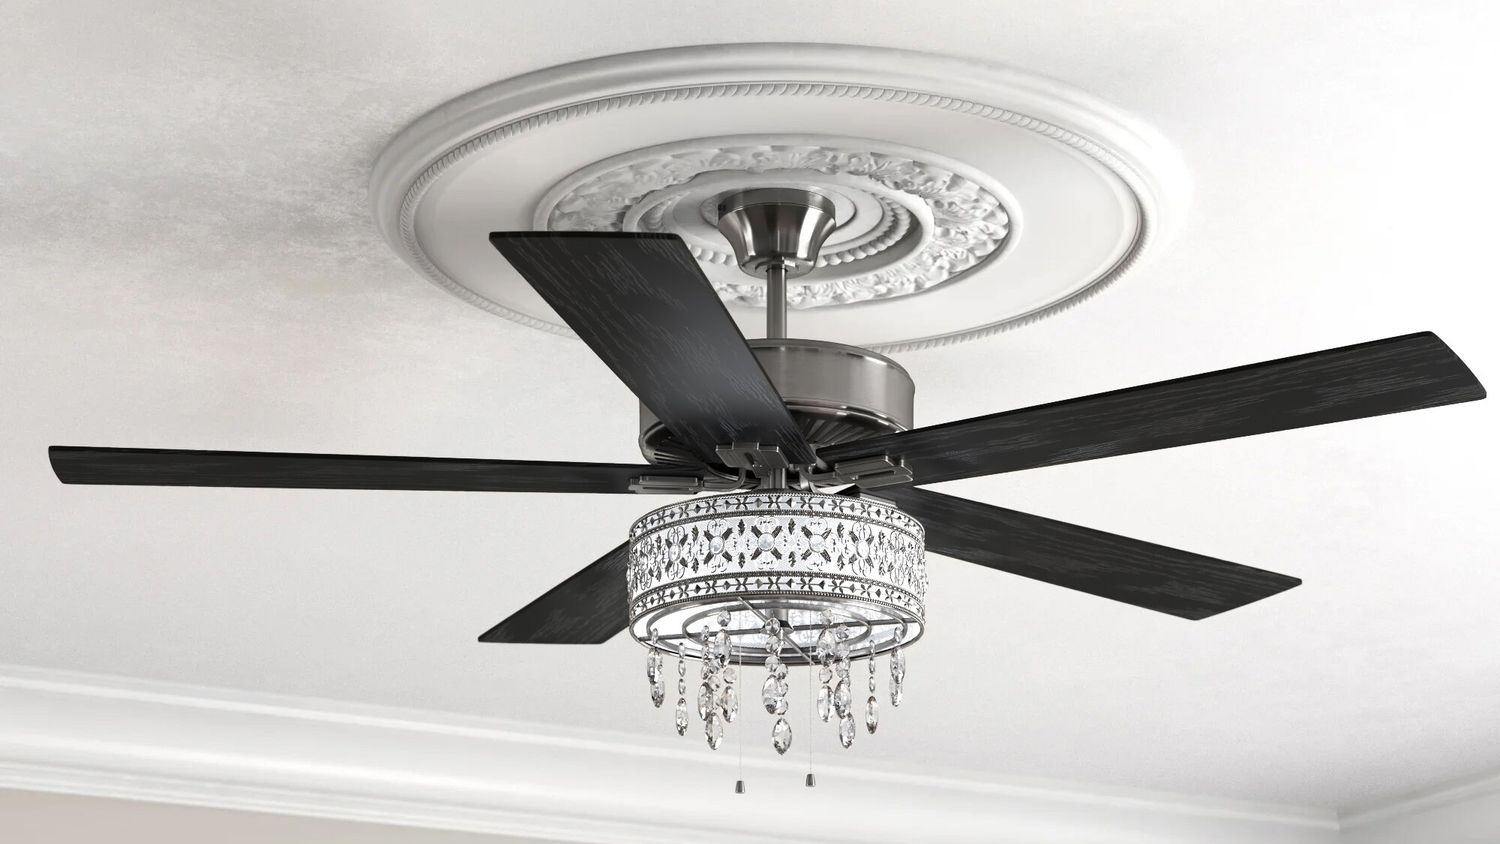 The 10 Best Ceiling Fans In 2021 According To Reviews Real Simple - Best Flush Mount Ceiling Fans 2021